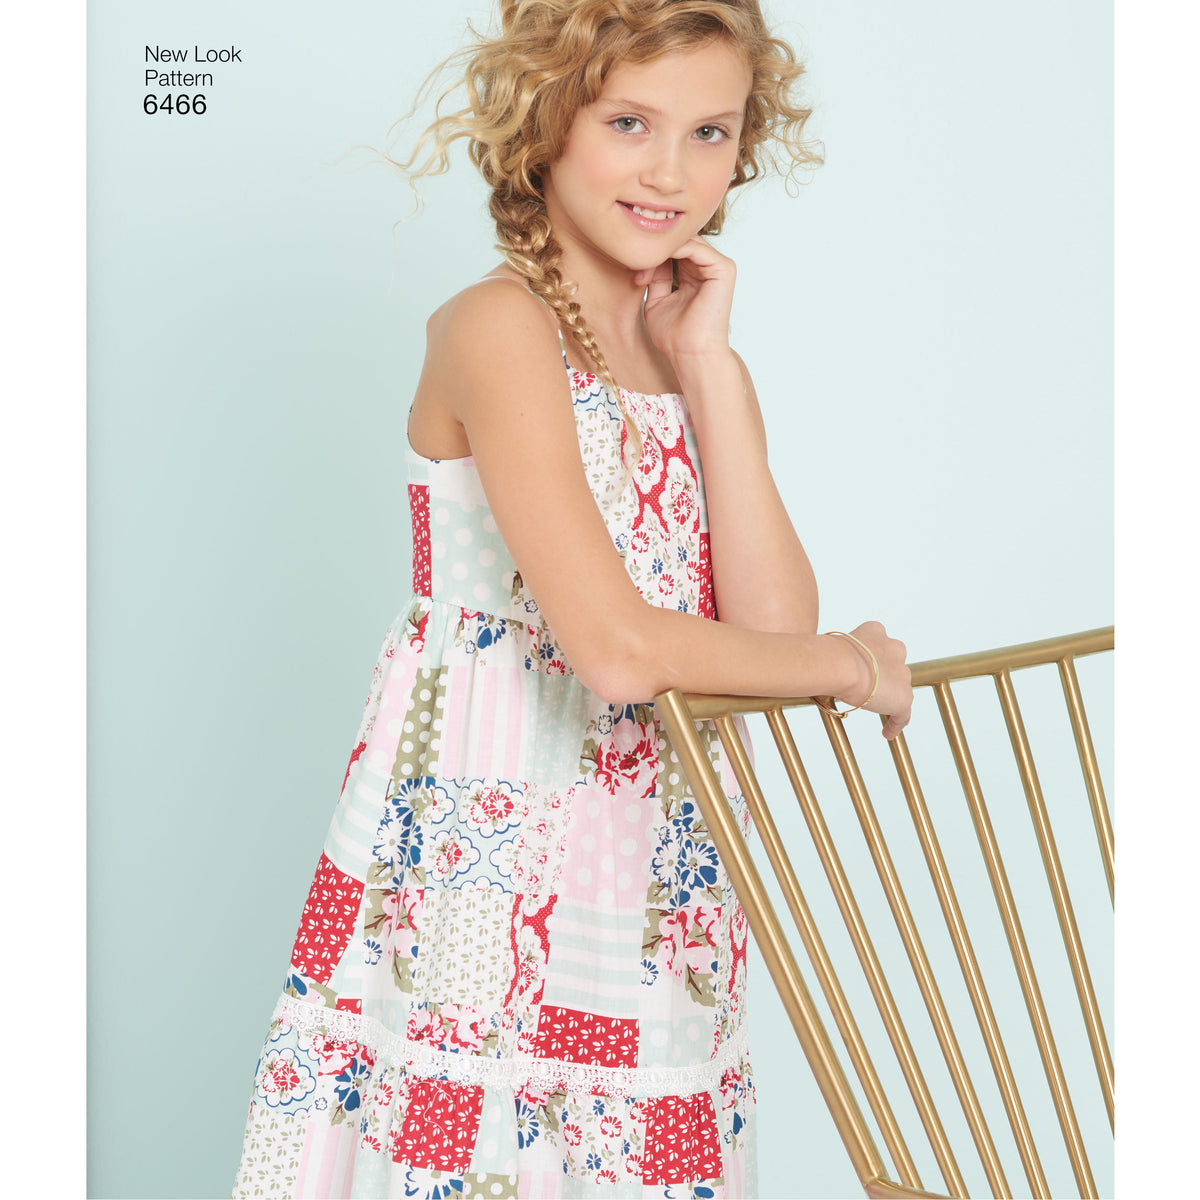 6466 Girls' Dresses with Trim, Bodice and Lace Variations